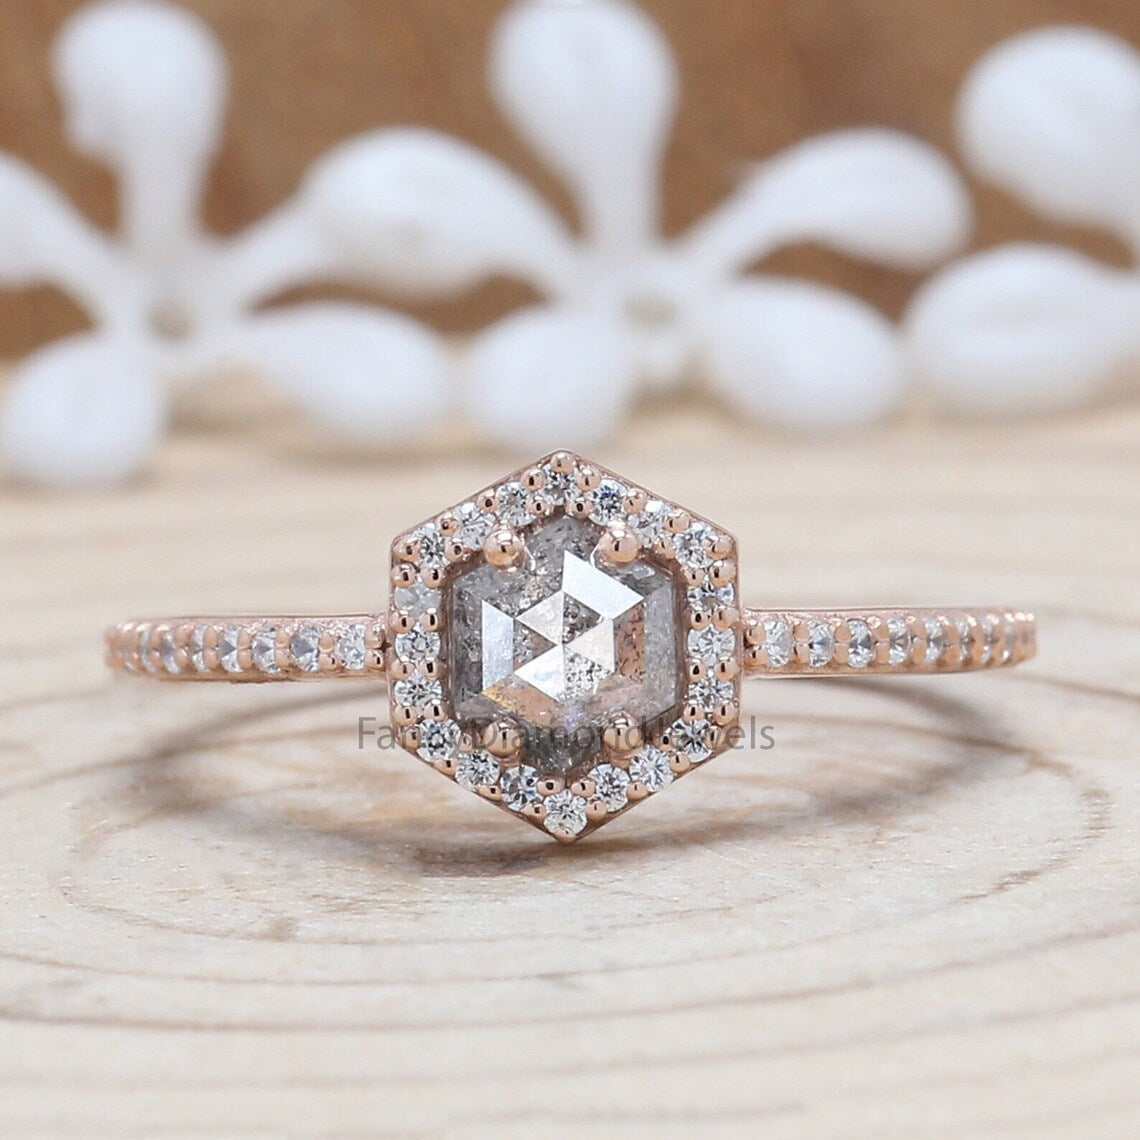 0.58 Ct Natural Hexagon Shape Salt And Pepper Diamond Ring 5.45 MM Hexagon Cut Diamond Ring 14K Solid Rose Gold Silver Engagement Ring QN536